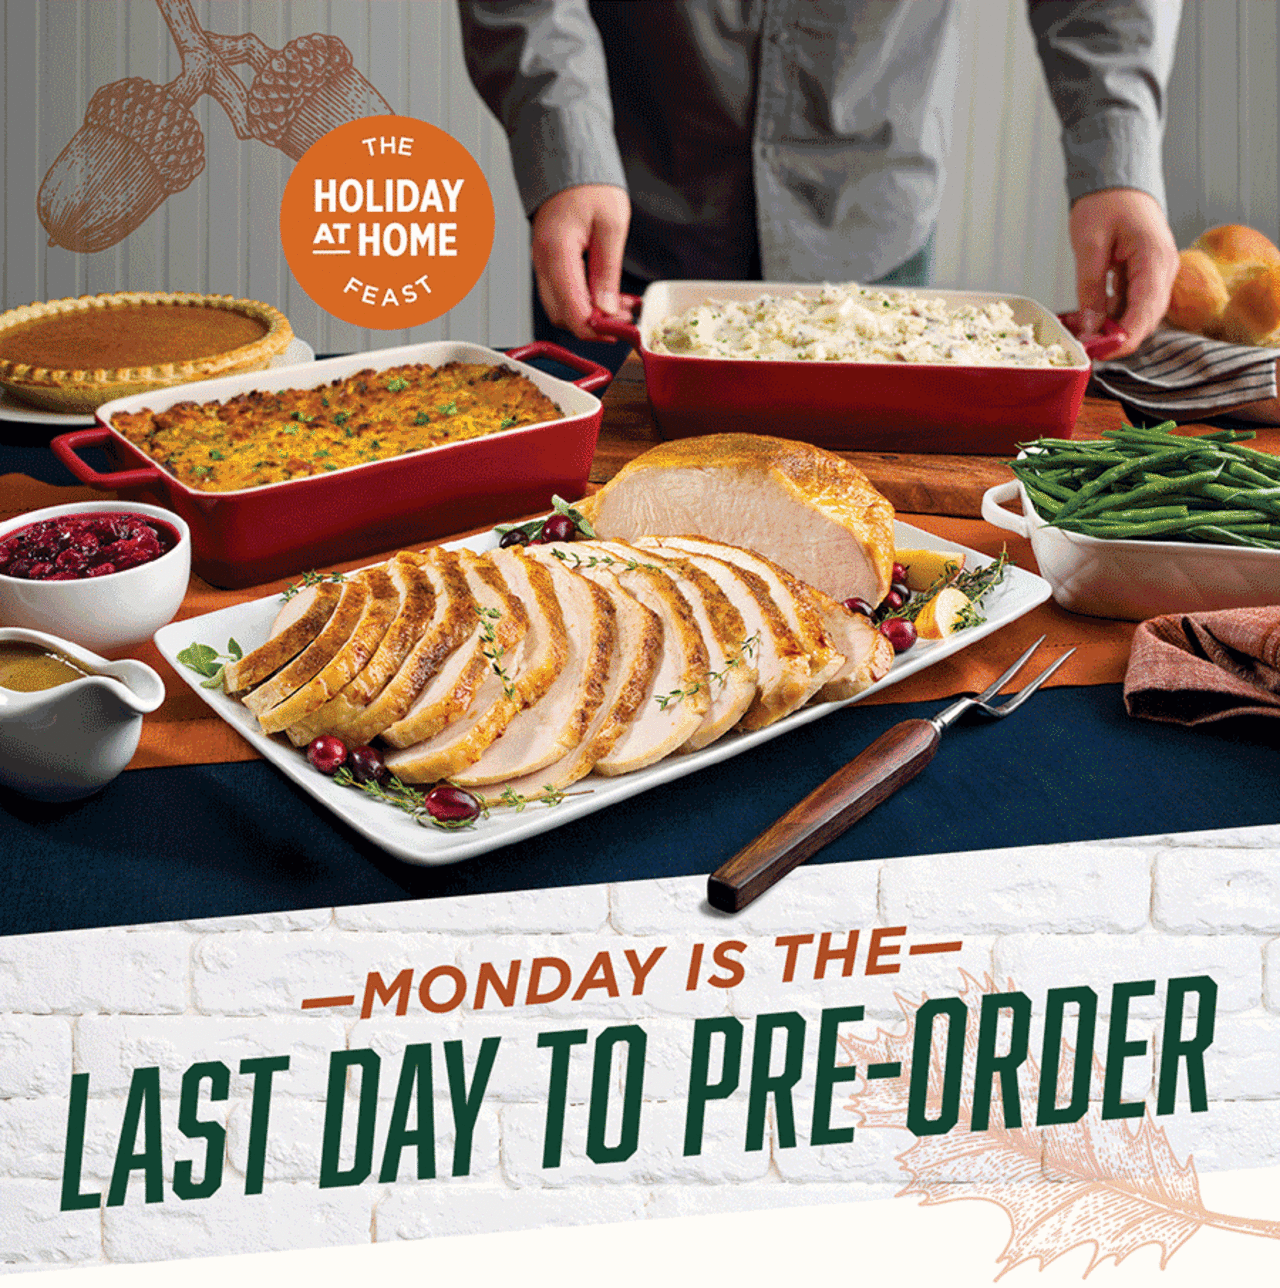 Monday is the last day to pre-order!